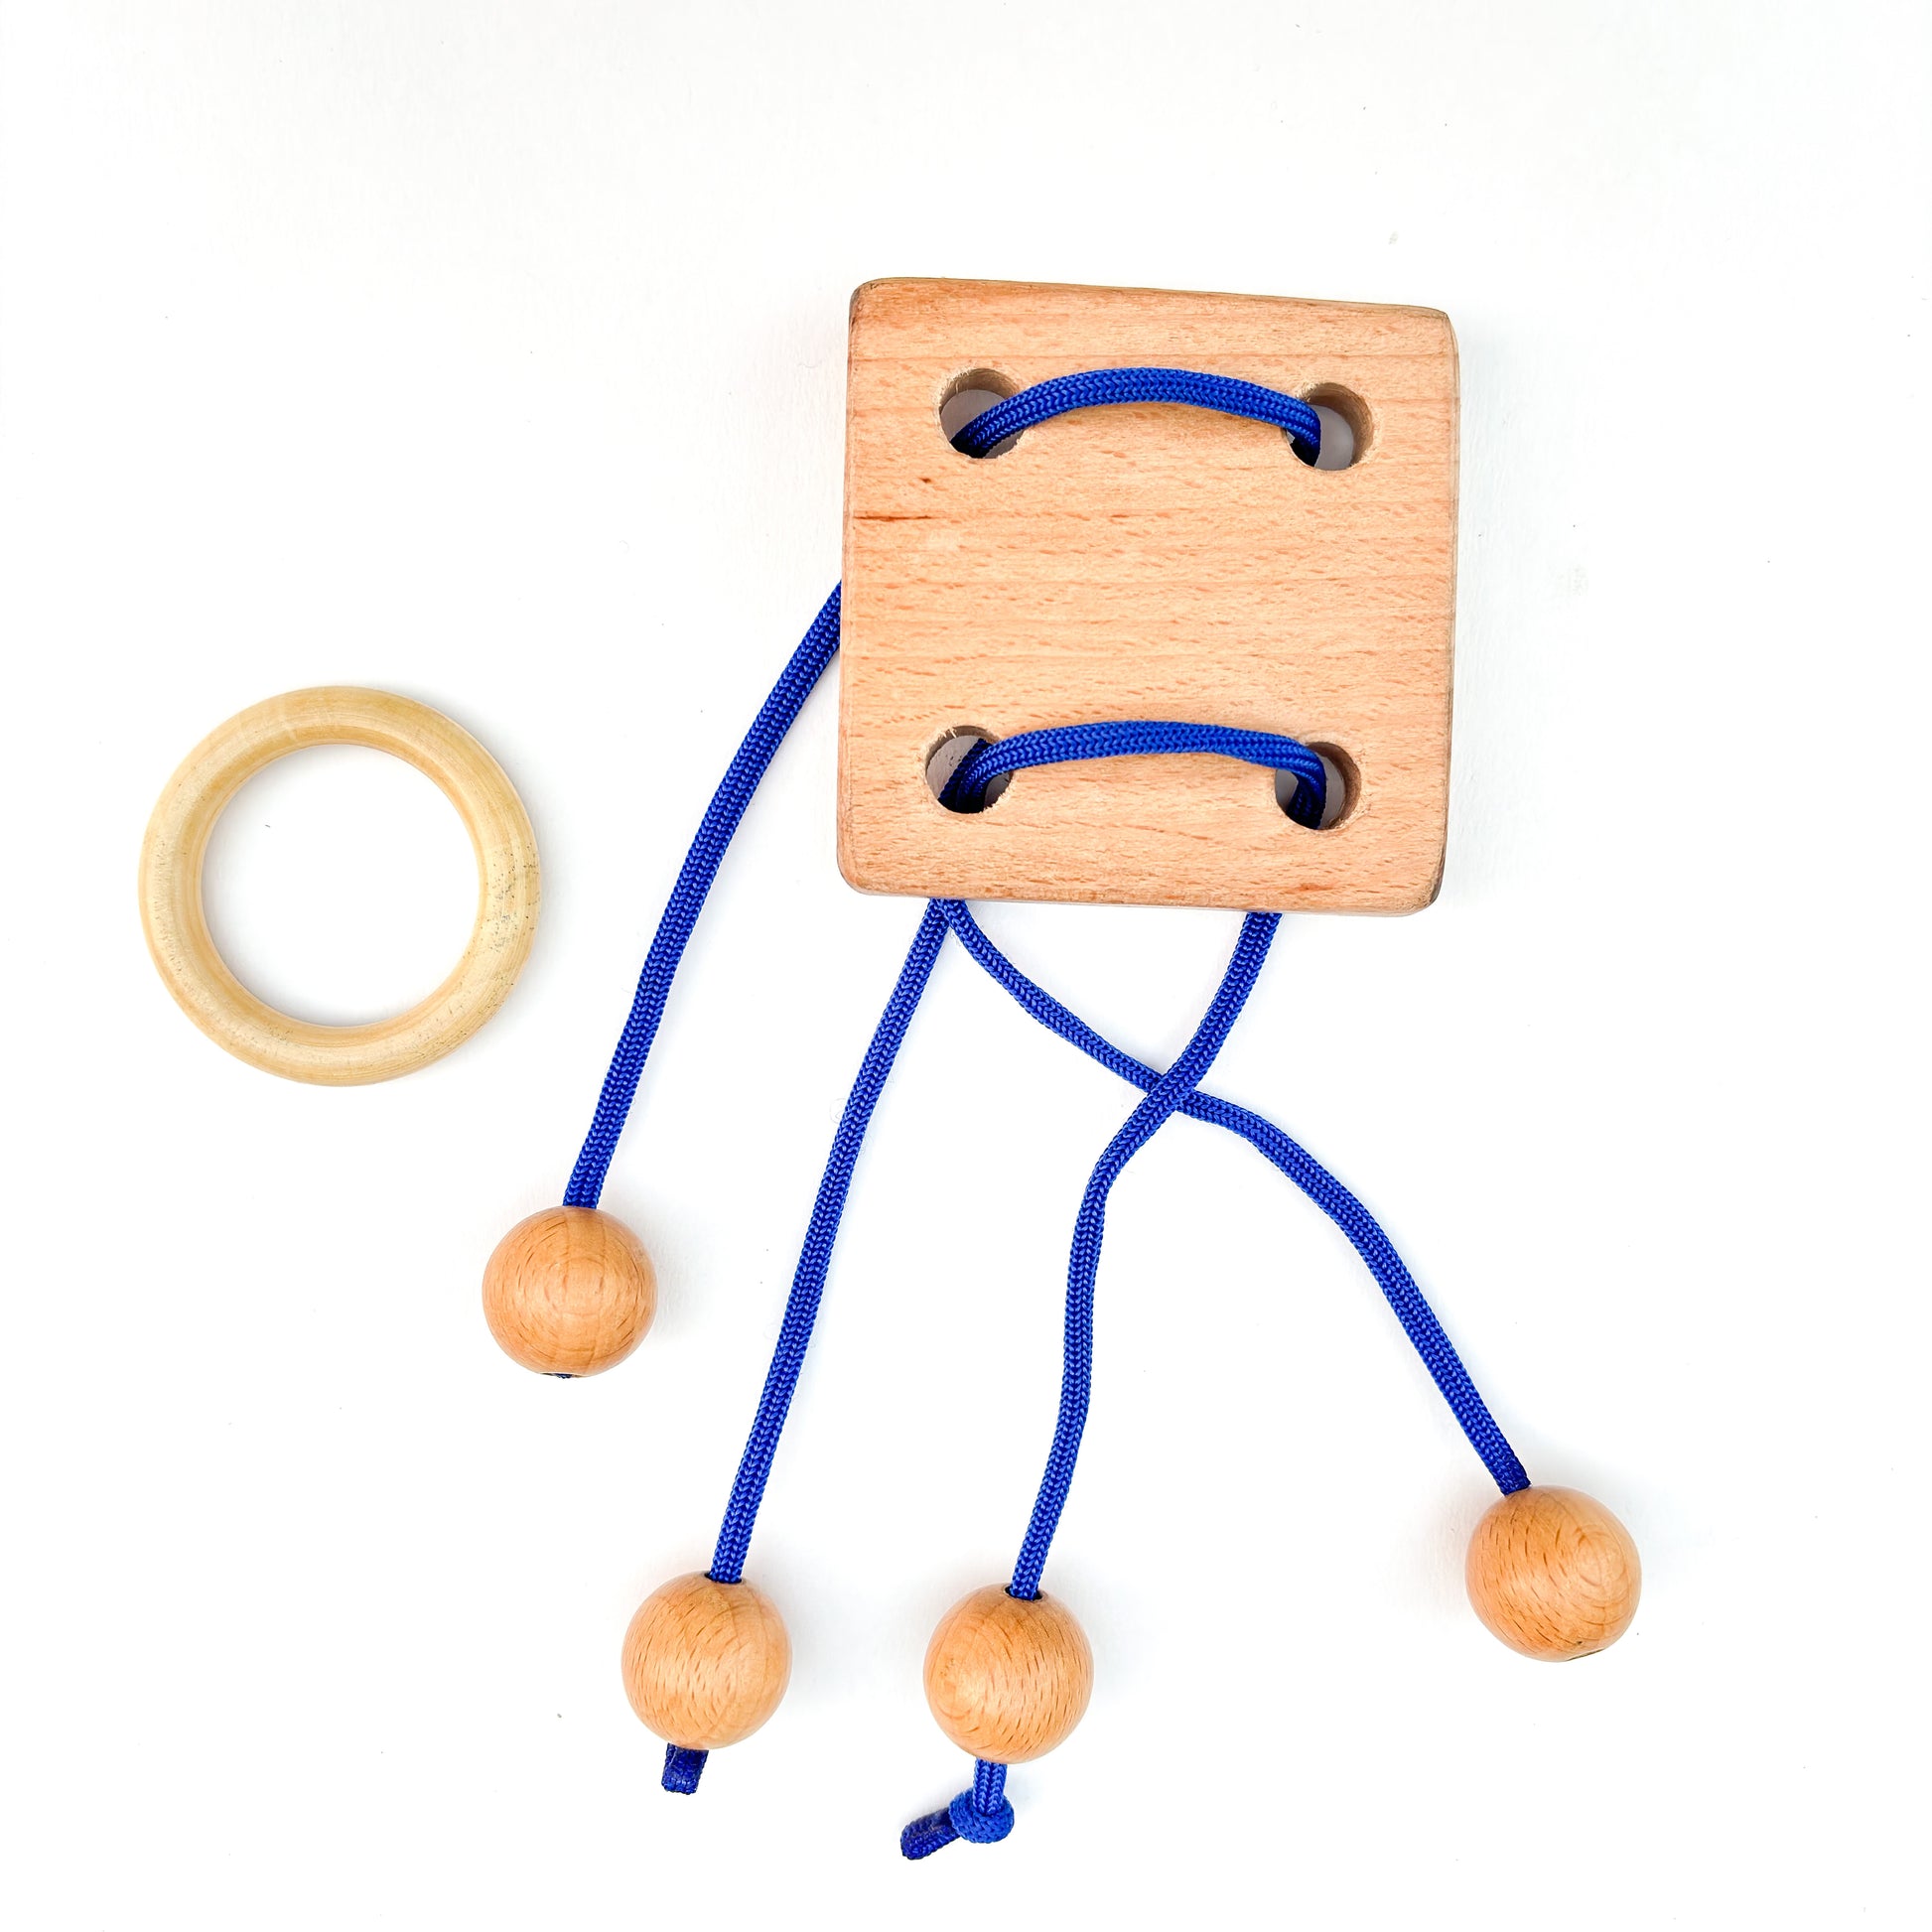 Wooden disentanglement String puzzle with blue rope, ball, and ring on white background